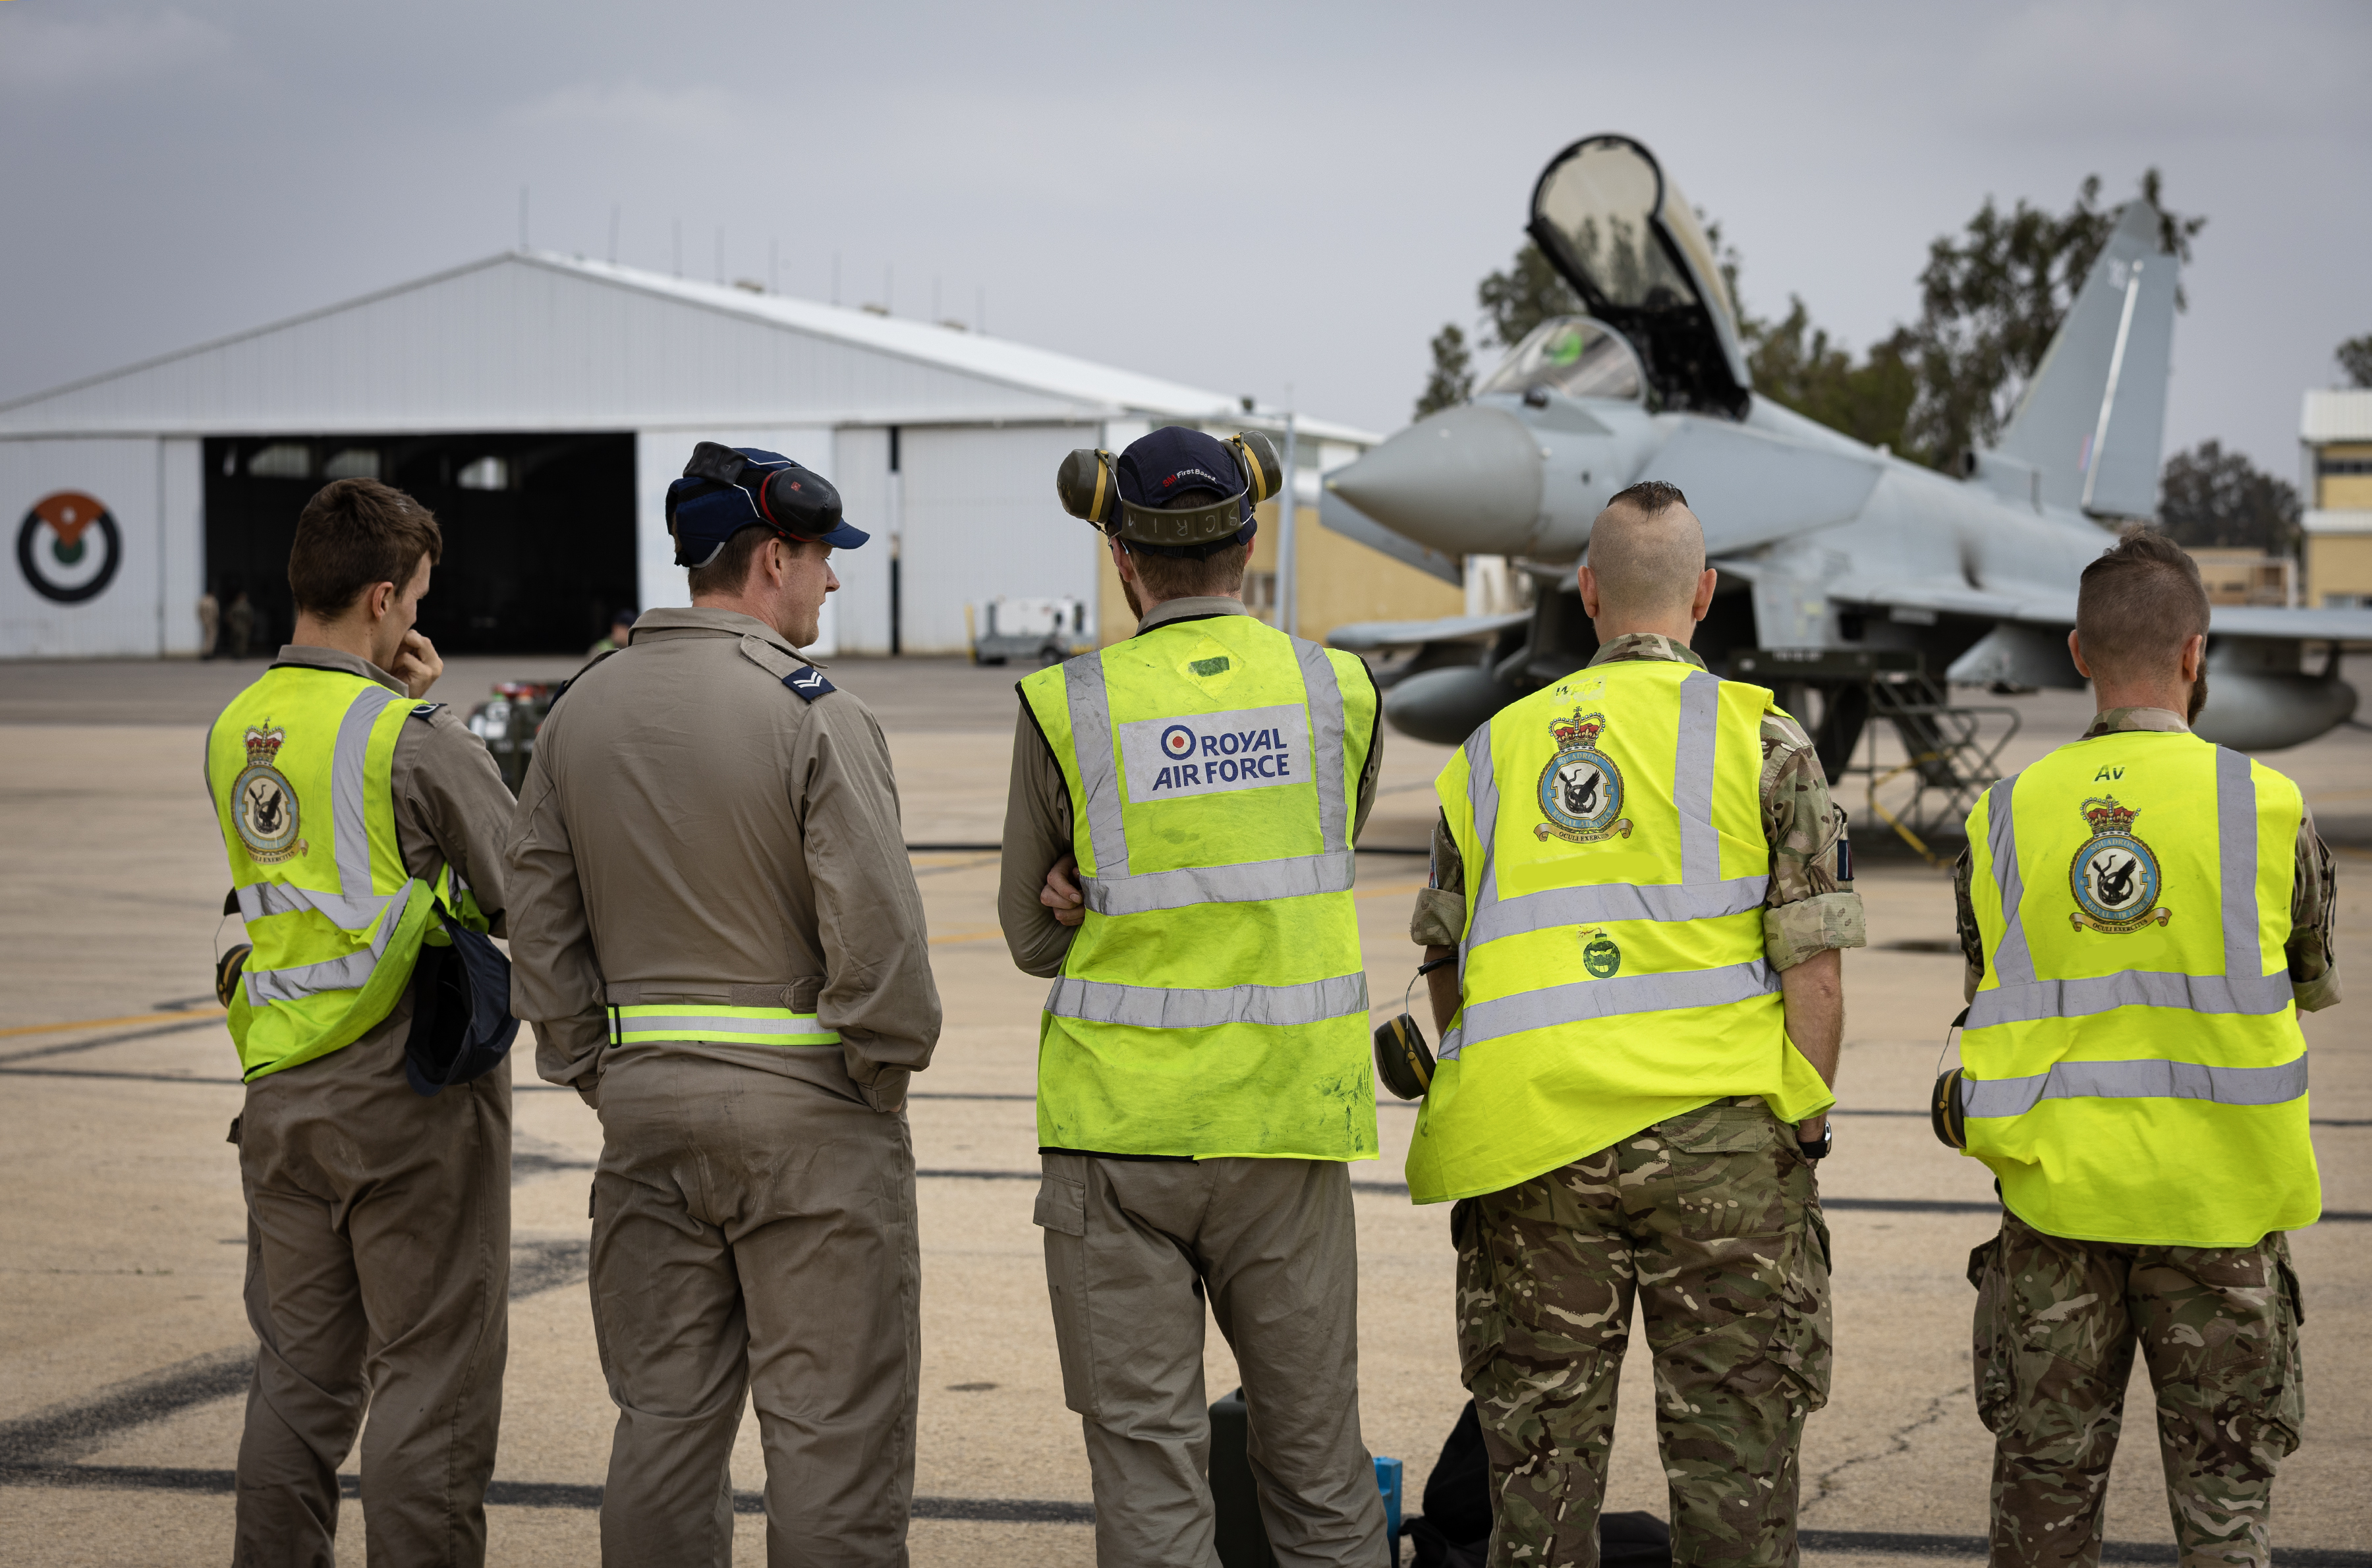 Image shows RAF aviators standing in a line looking towards a RAF Typhoon on the airfield.